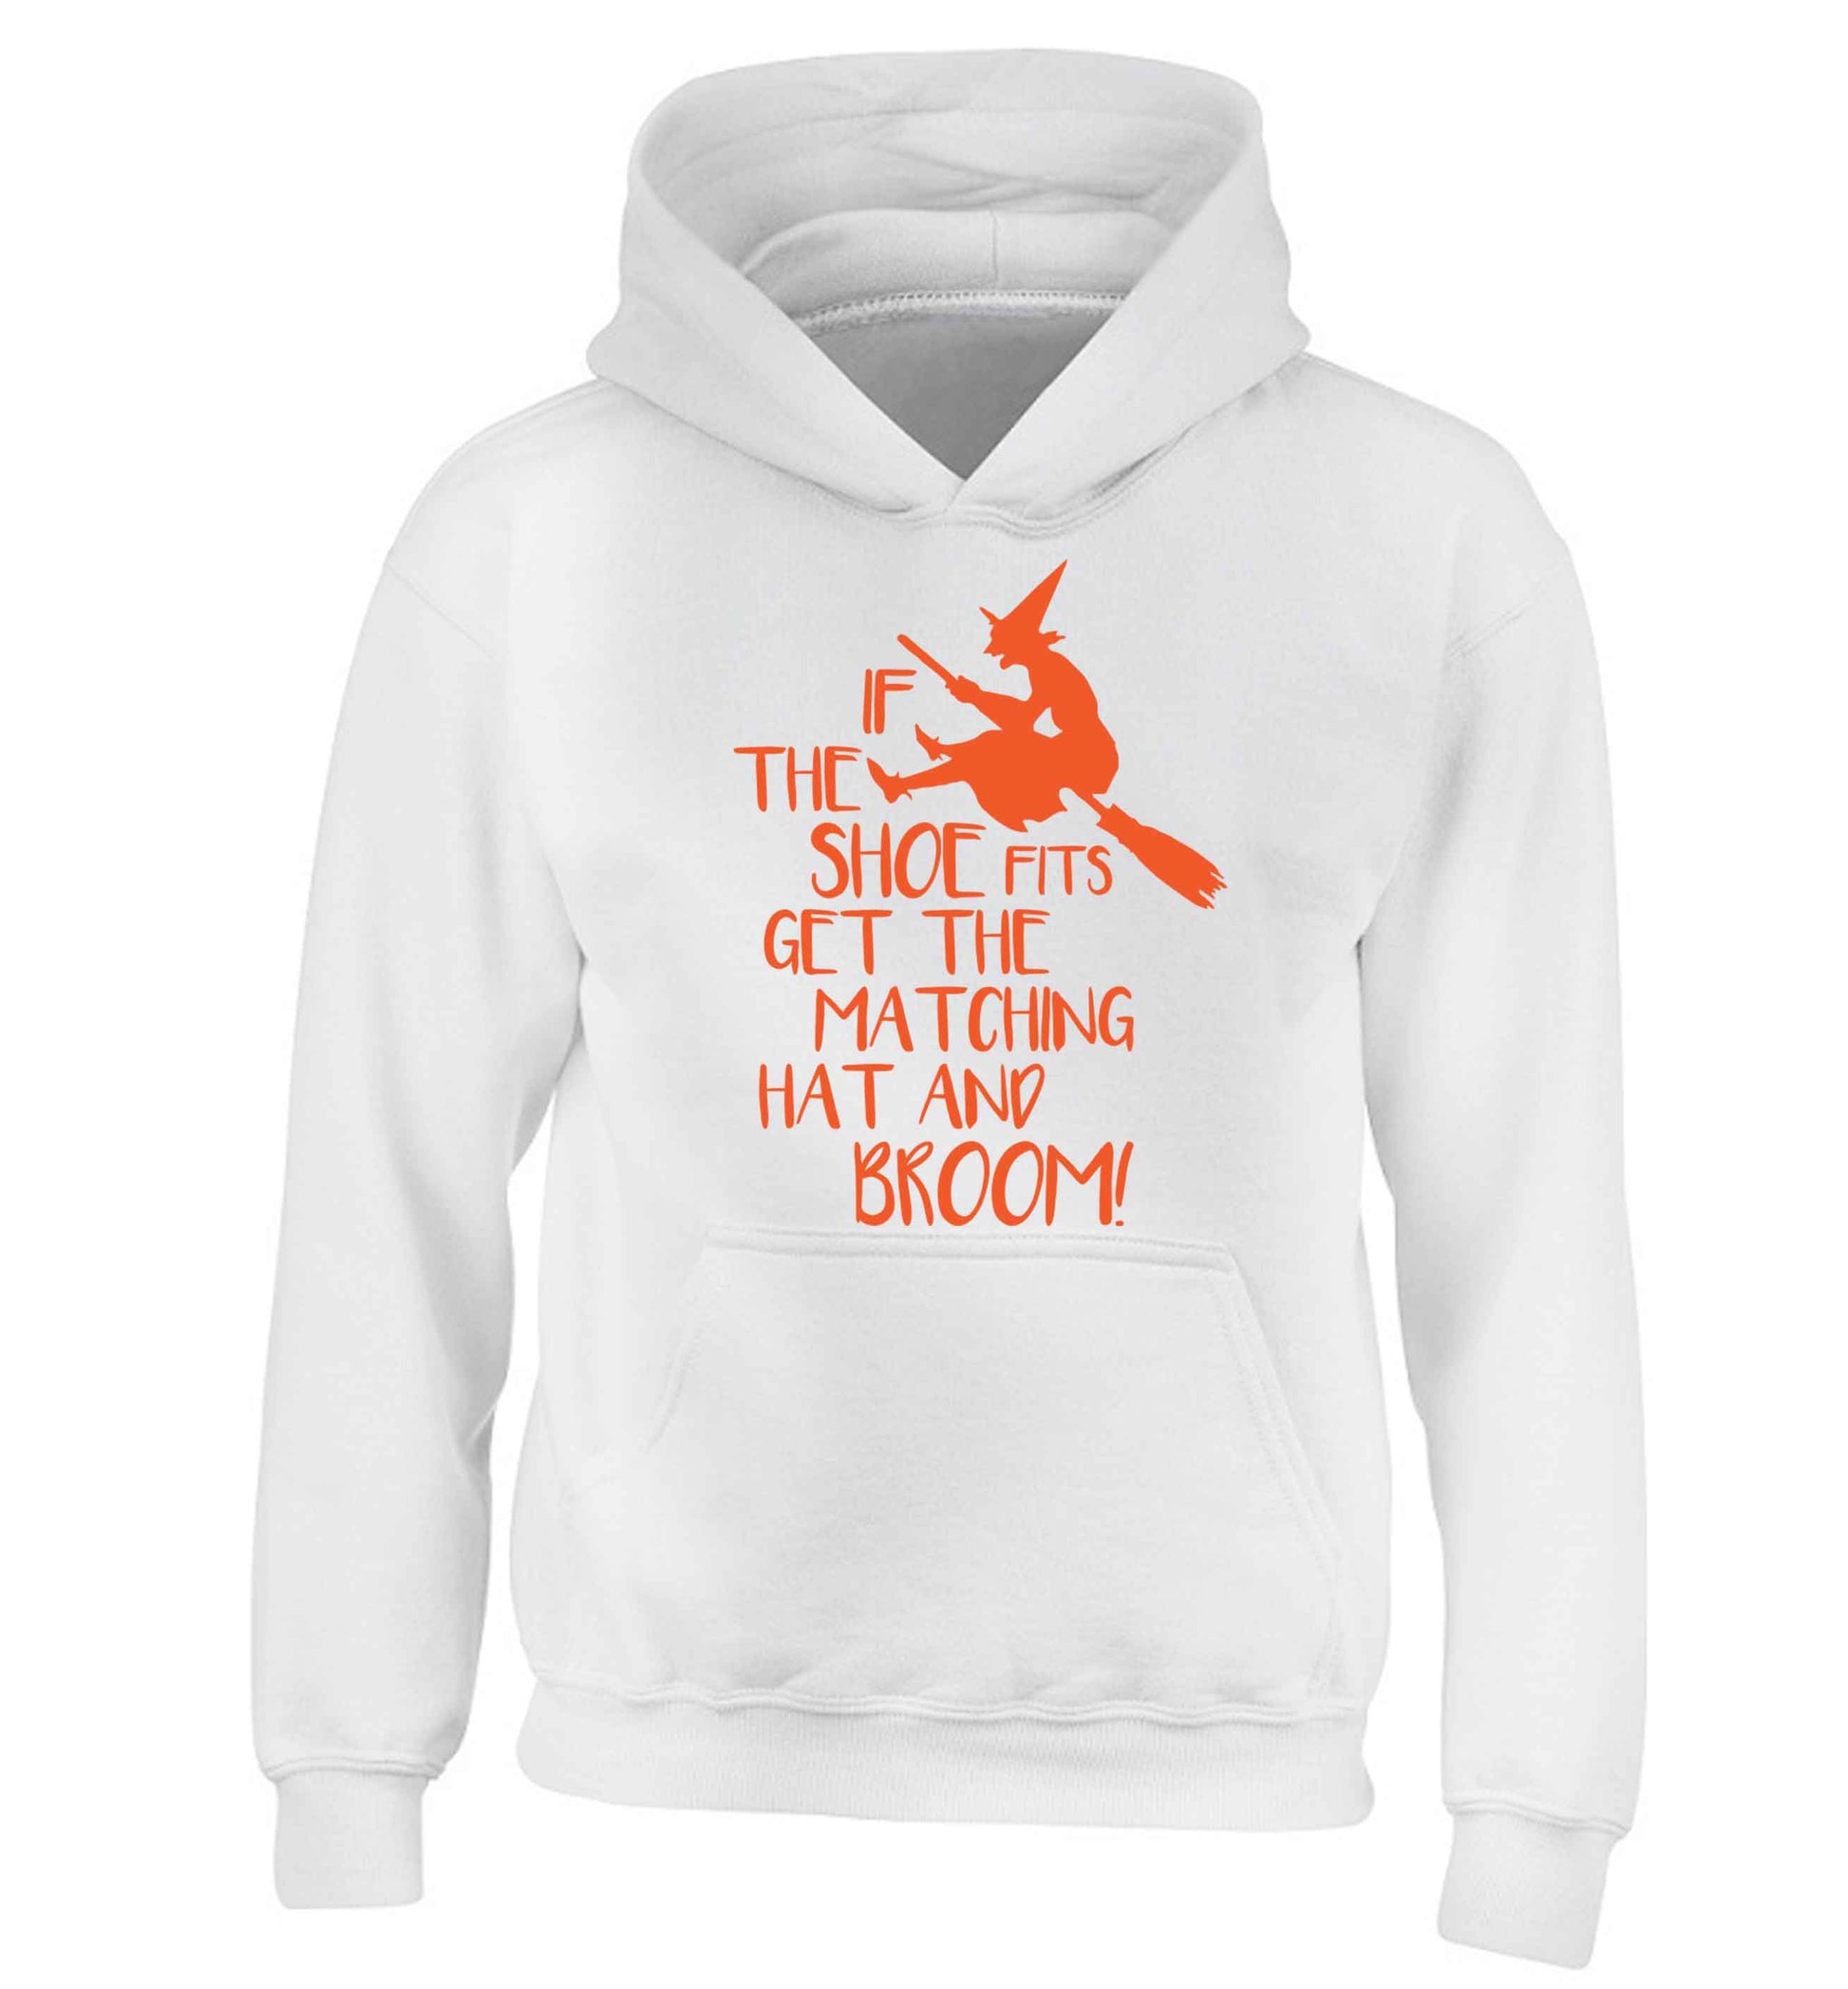 If the shoe fits get the matching hat and broom children's white hoodie 12-13 Years